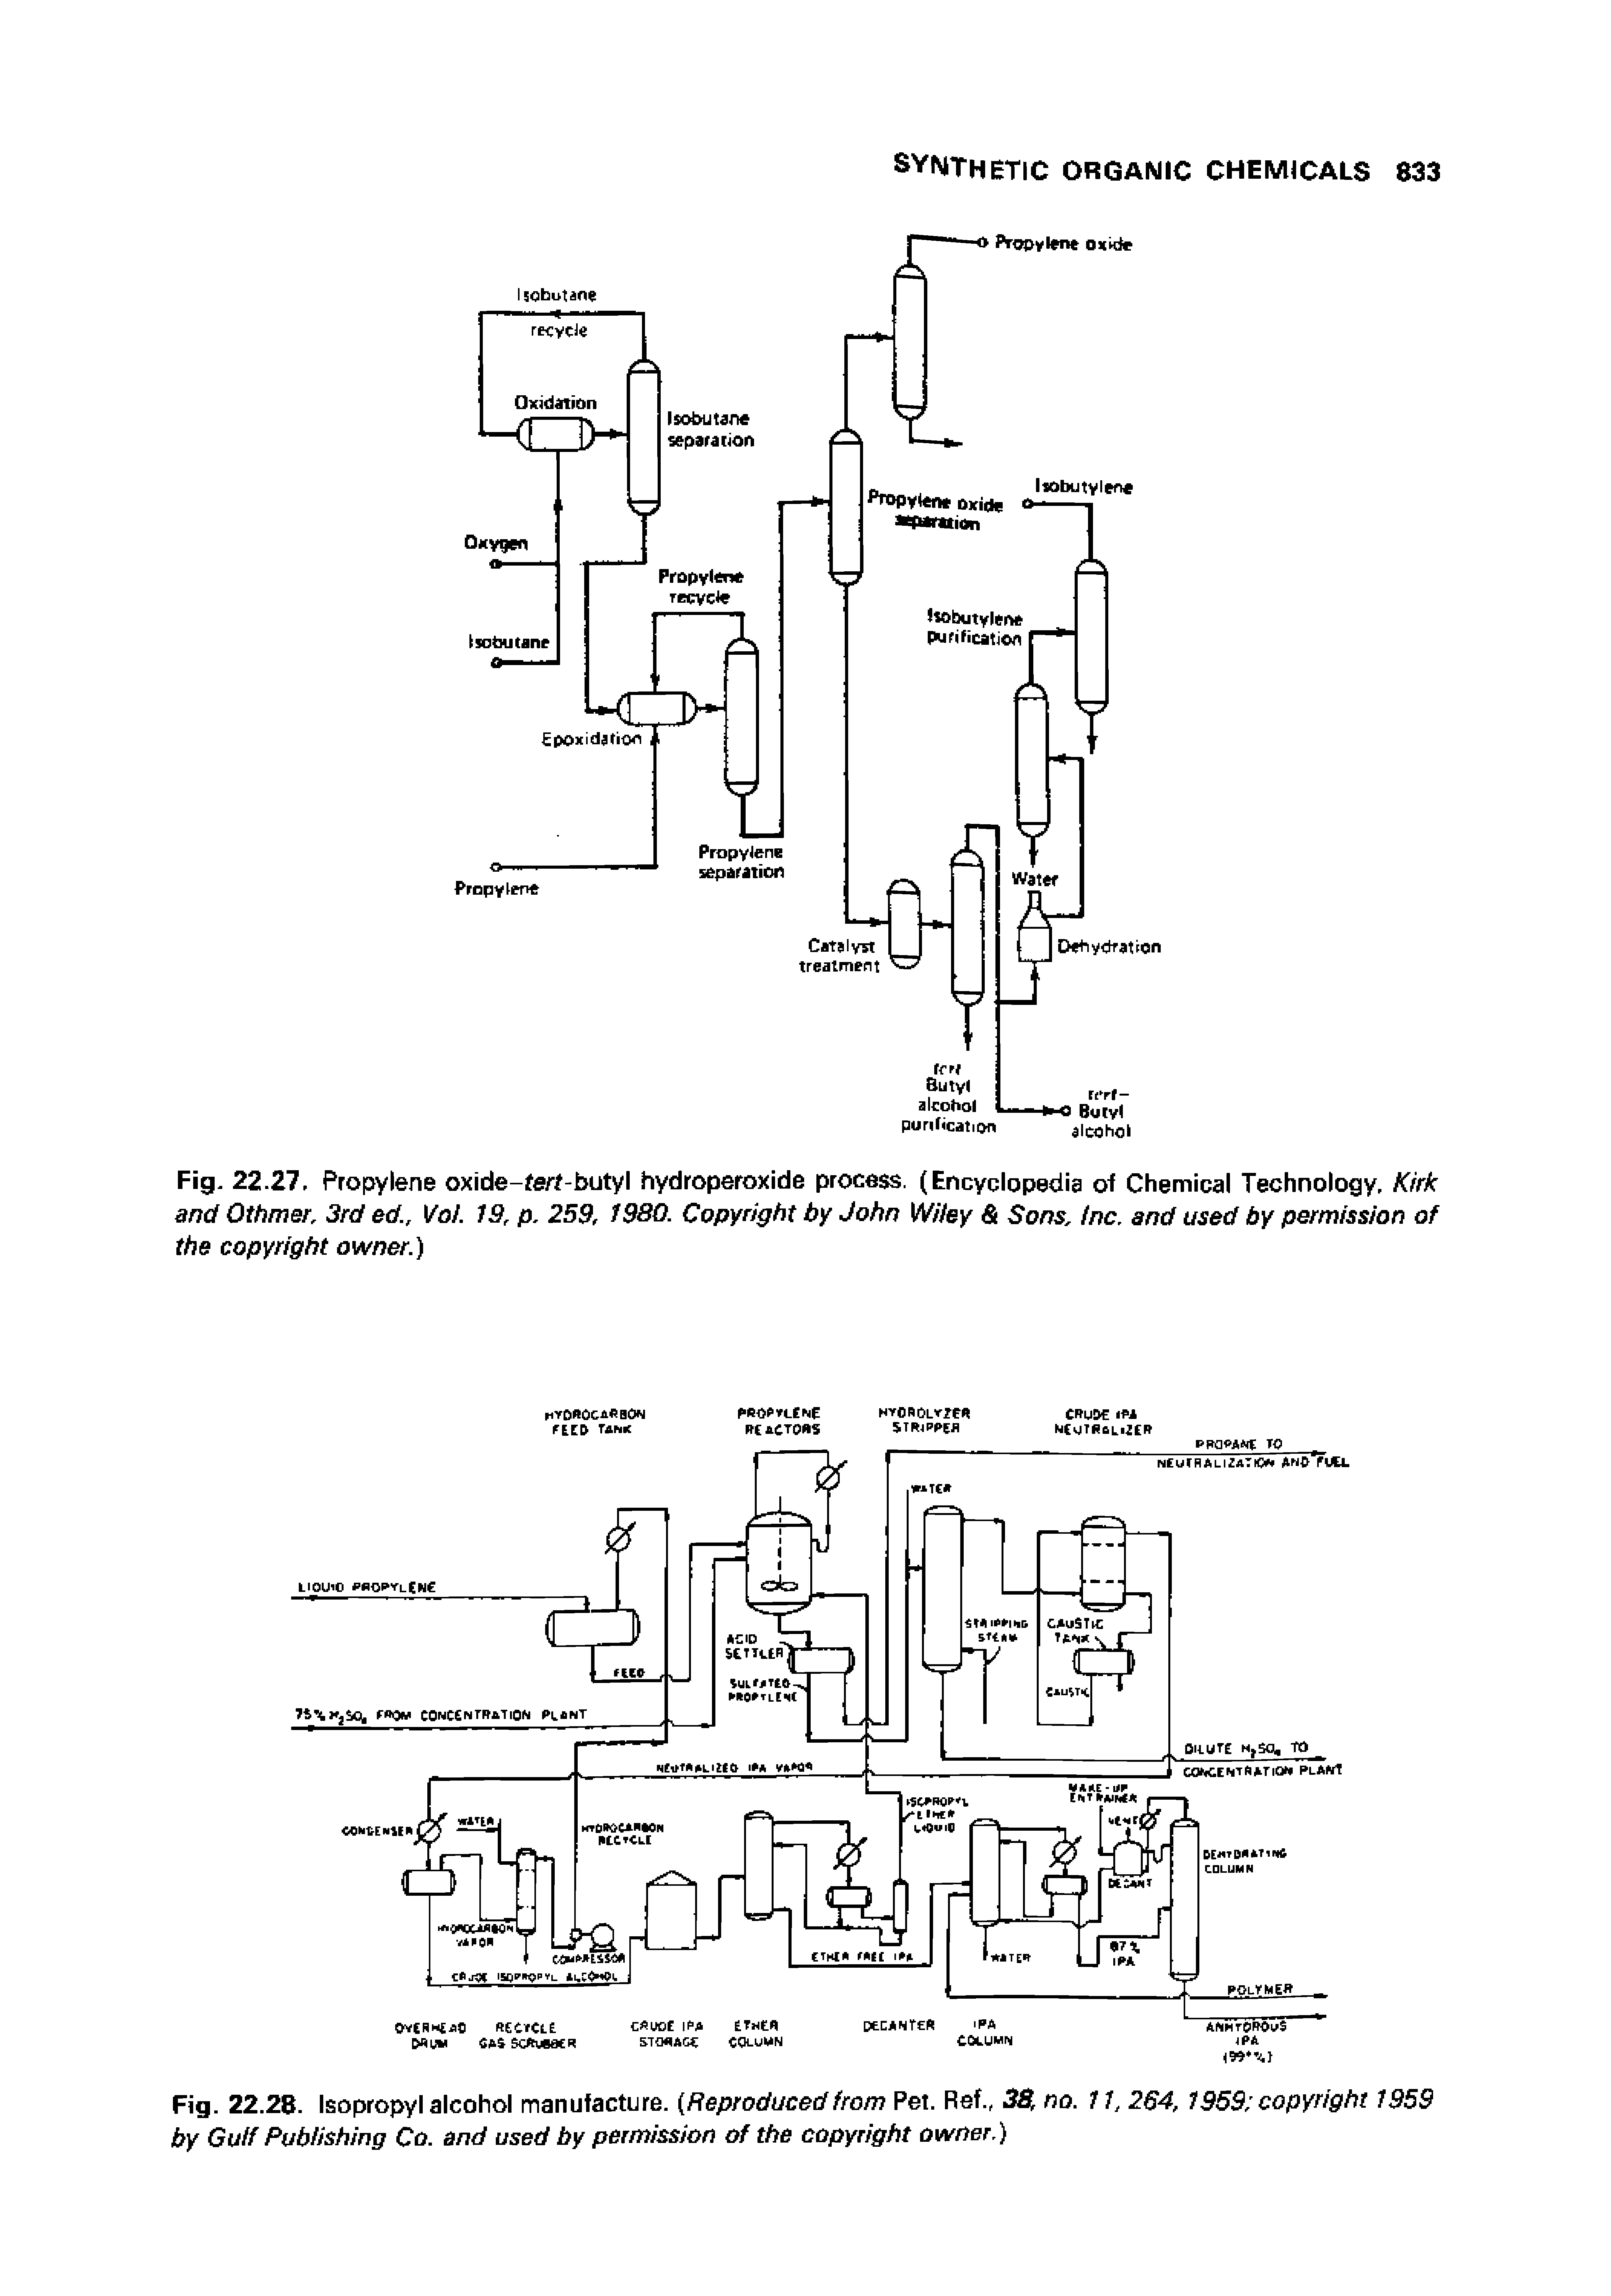 Fig. 22.28. Isopropyl alcohol manufacture. Reproduced from Pet. Ref., 3B, no. 11, 264, 1959 copyright 1359 by Guif Publishing Co. and used by permission of the copyright owner.)...